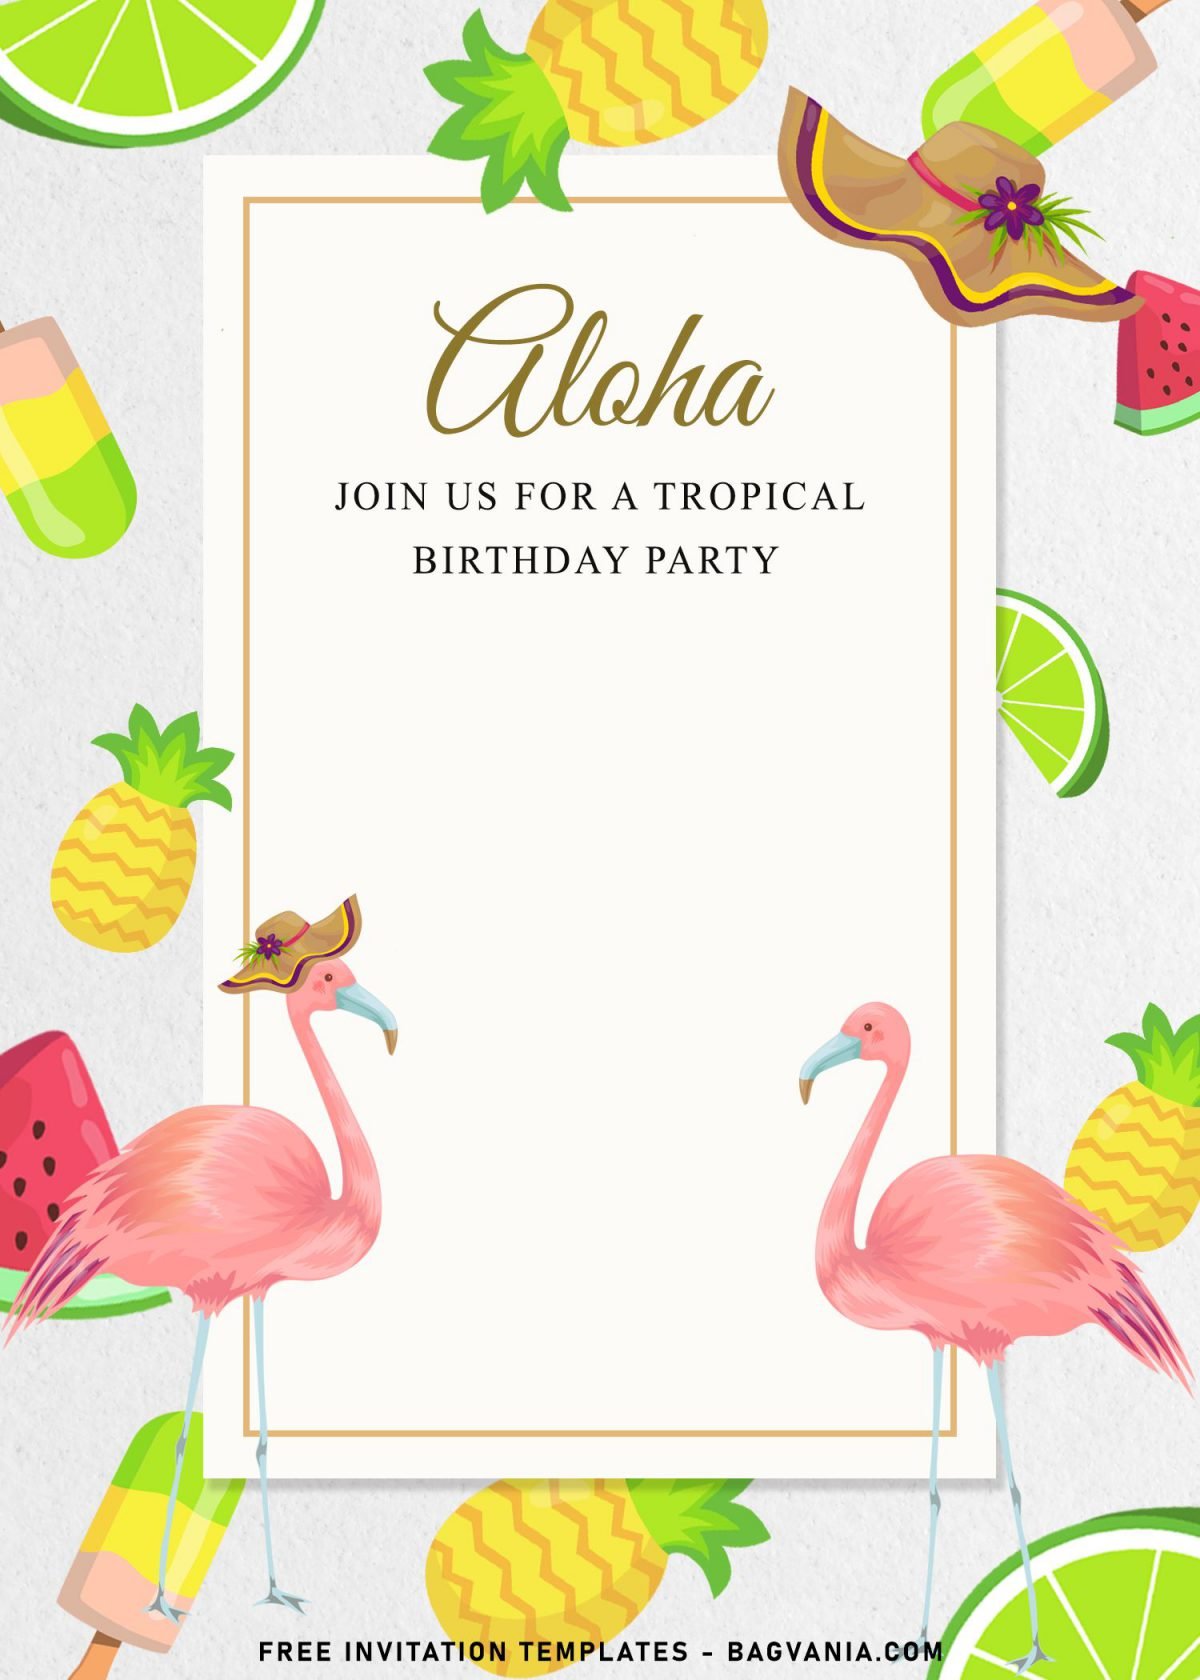 7+ Best Tropical Birthday Invitation Templates To Celebrate Your Kid's Birthday In Summer and has pink flamingoes